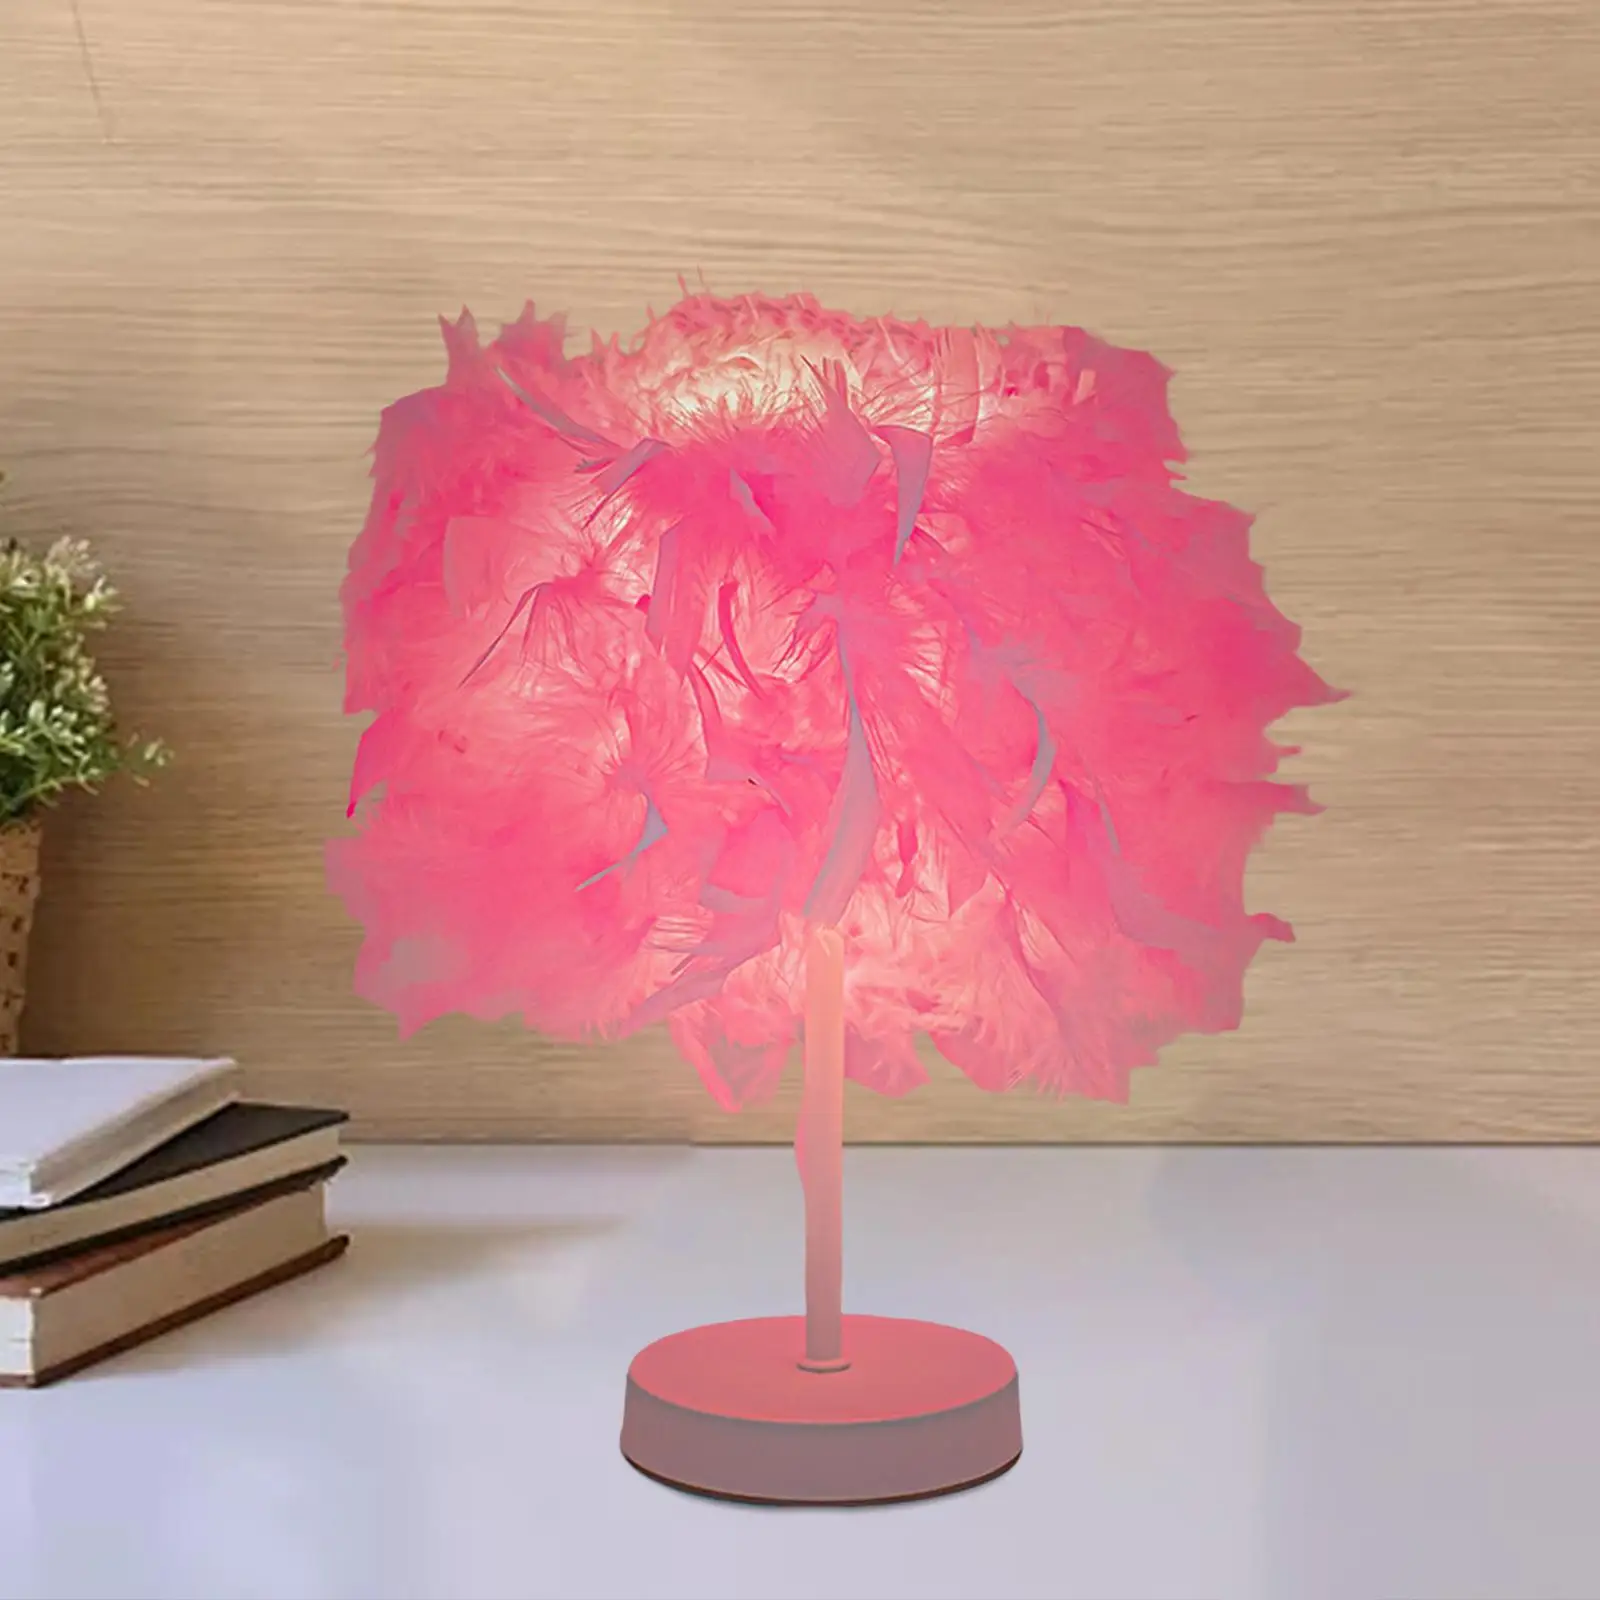 Desk Light Lighting Fixture Decorative Feathers Shade Table Lamp for Party